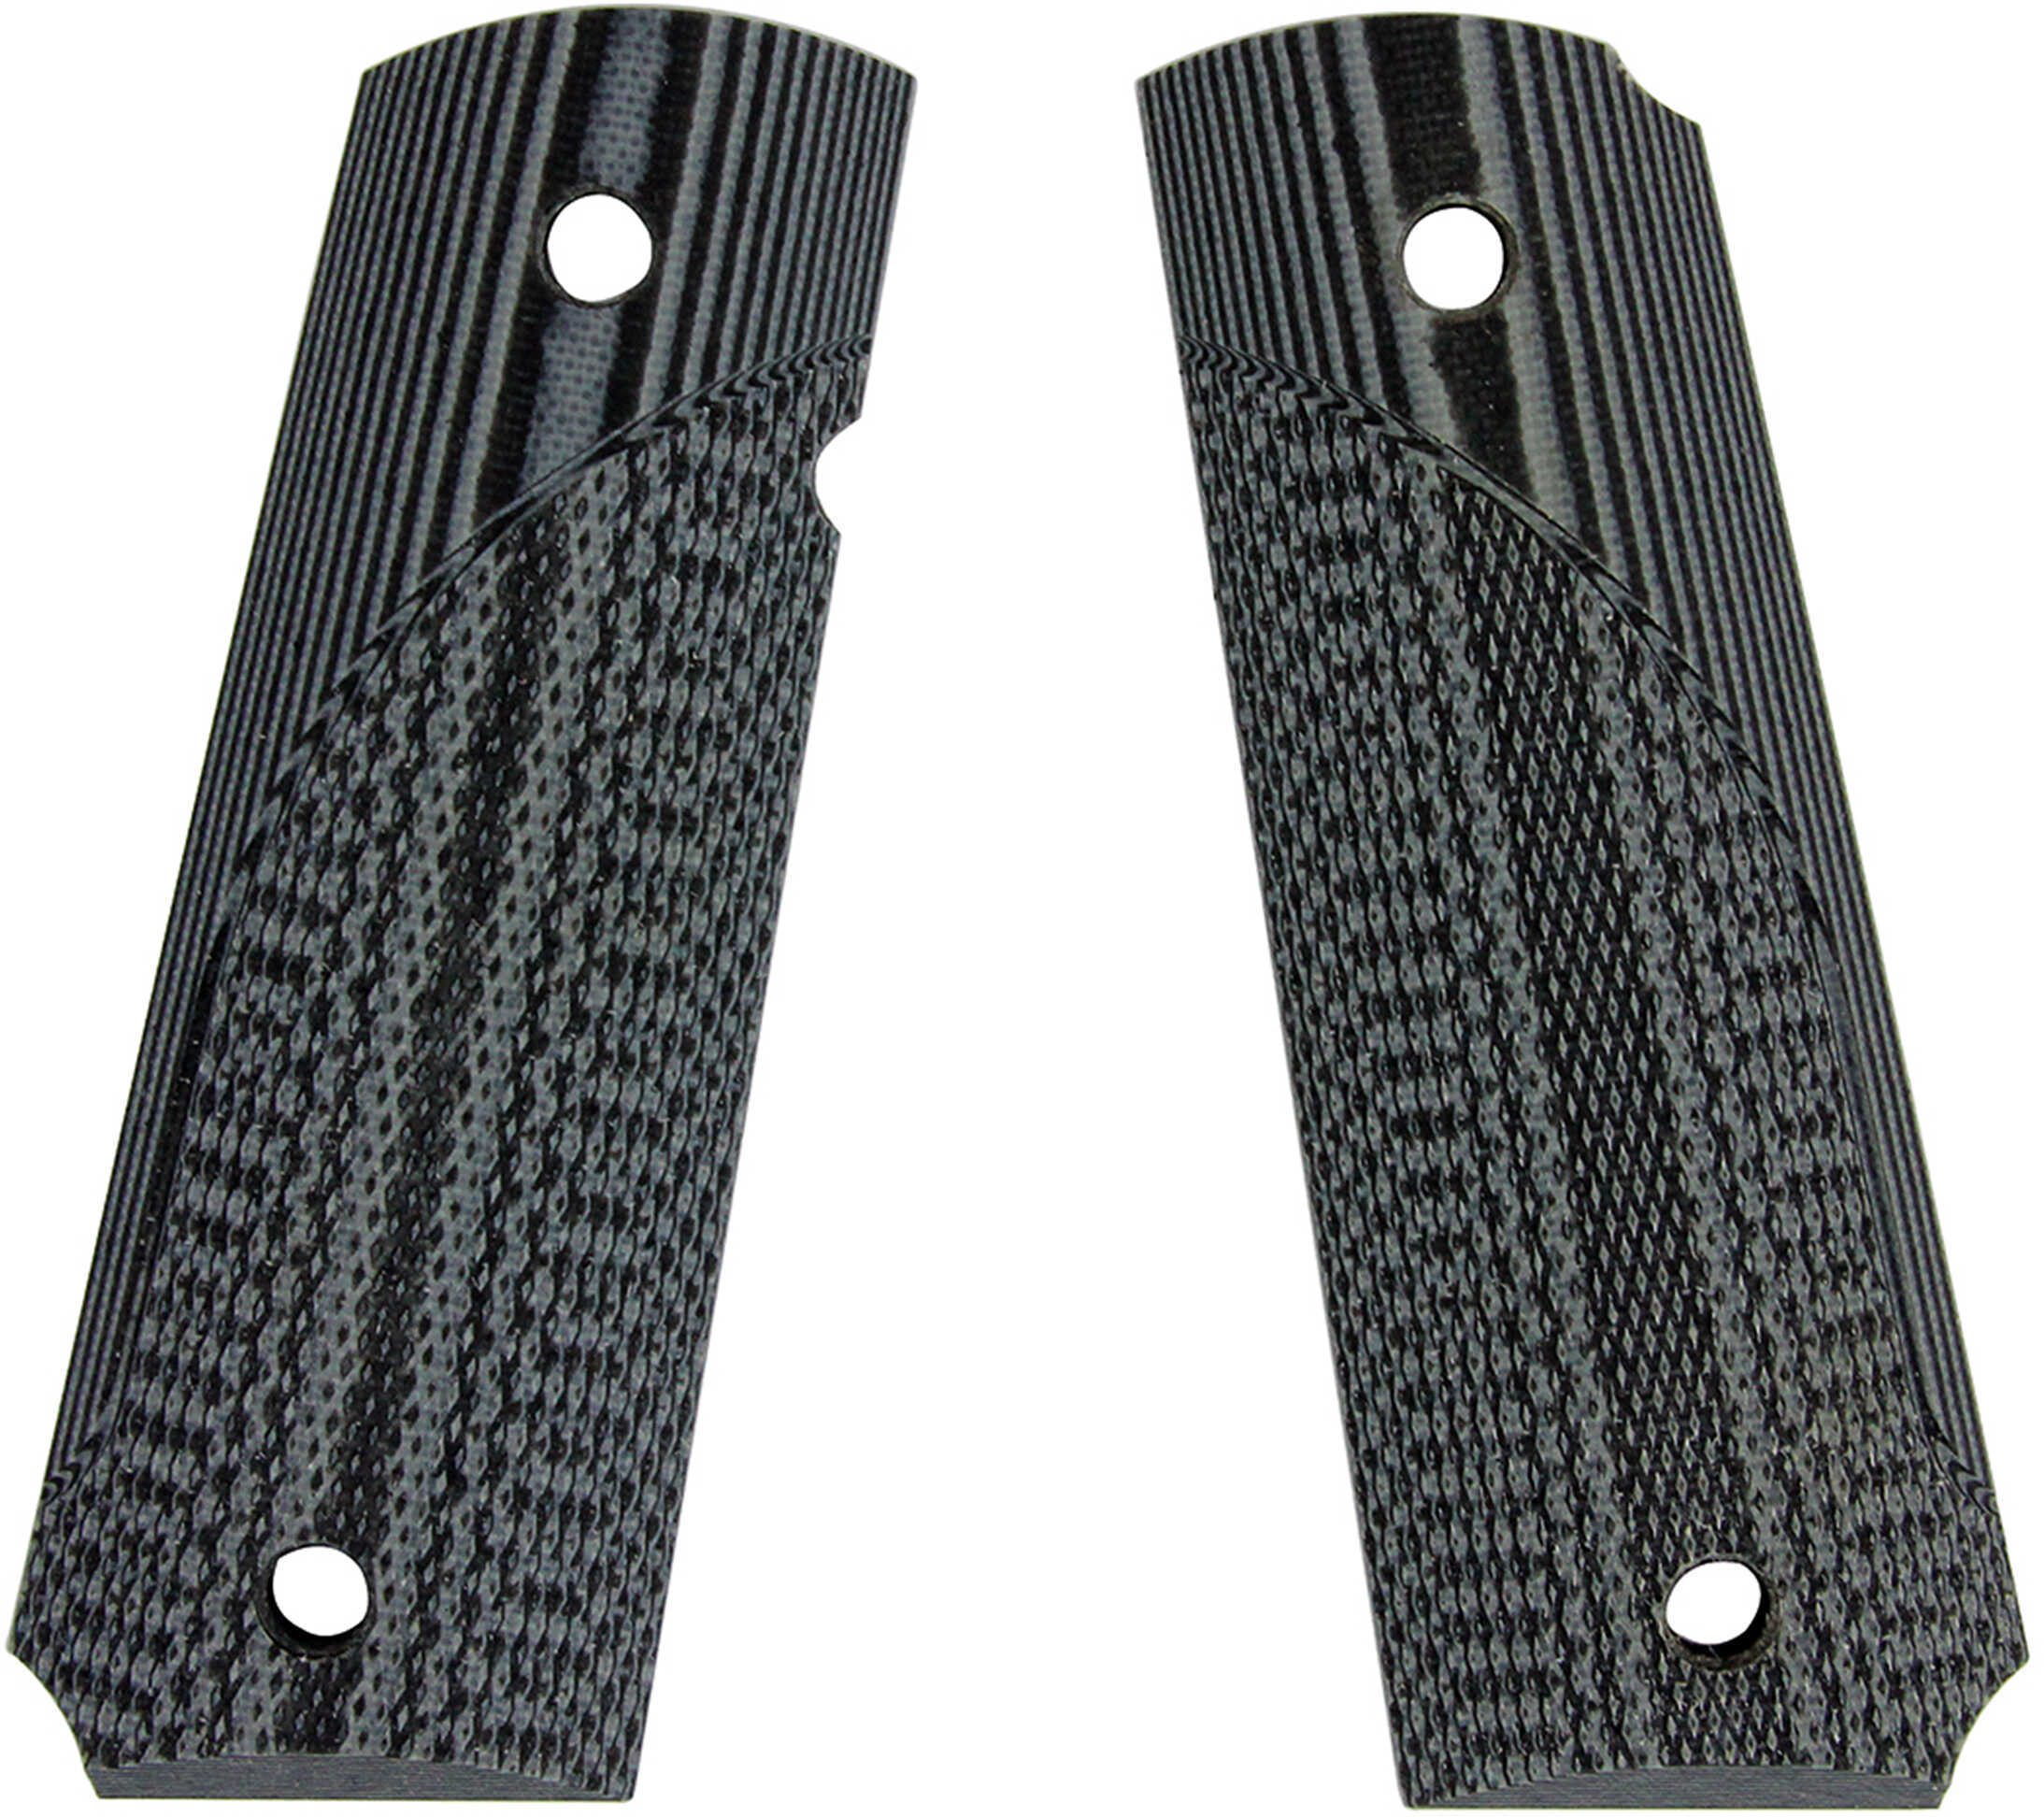 Pac G10 Dominator 1911 Gry/Blk Checkered